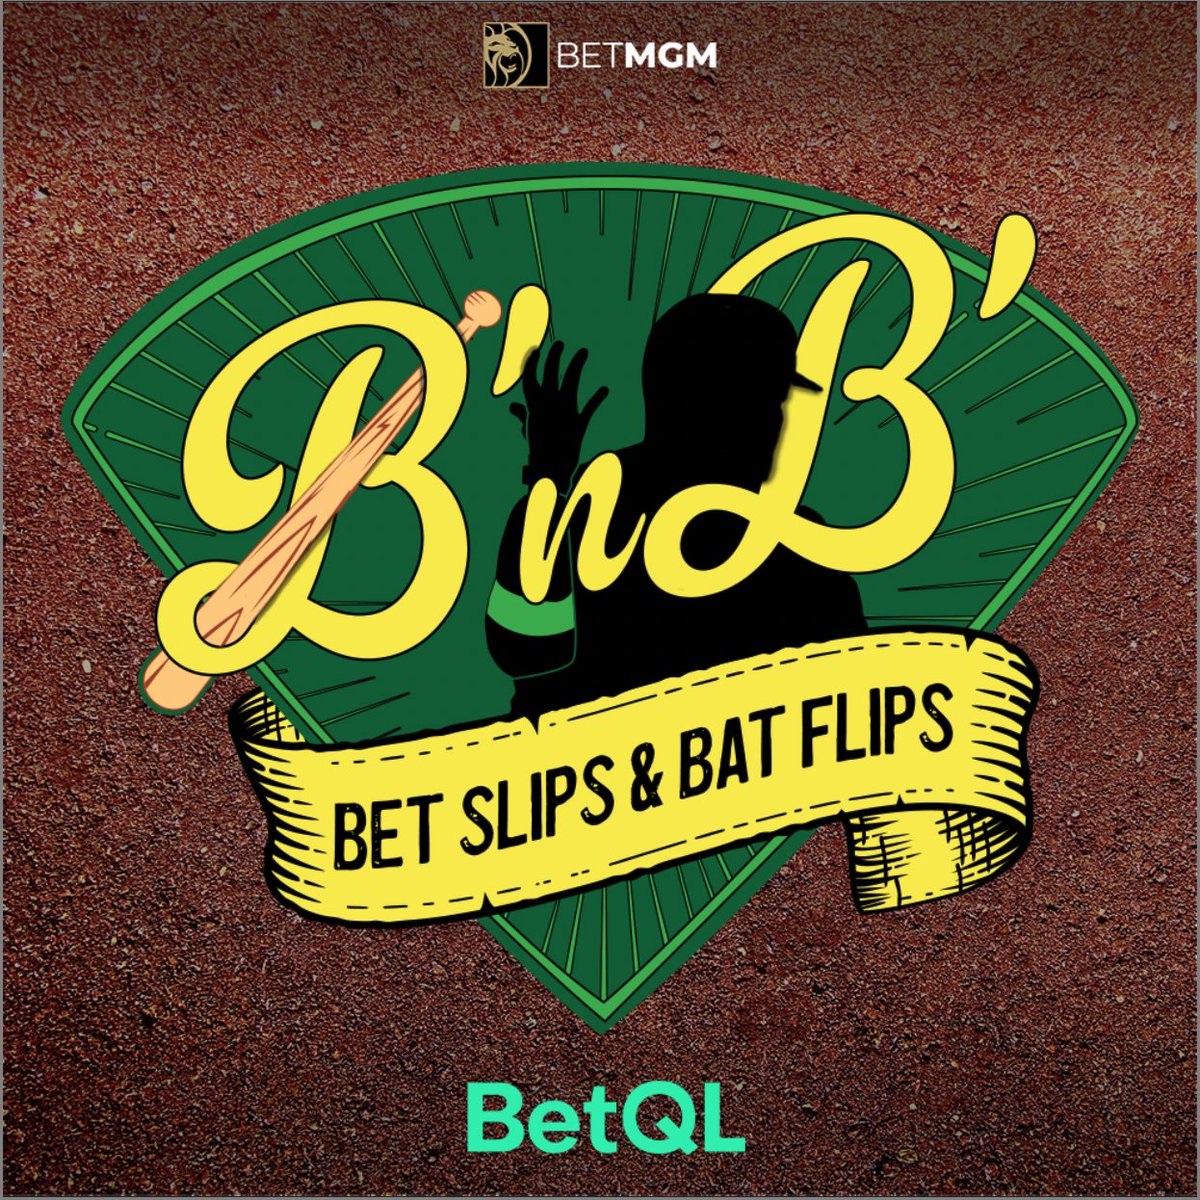 🚨𝗡𝗘𝗪 𝗦𝗛𝗢𝗪 𝗔𝗟𝗘𝗥𝗧🚨 Bet Slips and Bat Flips premieres 𝐓𝐎𝐌𝐎𝐑𝐑𝐎𝐖 Tuesday, March 26th ‼️ No more boring ⚾️ as @LucilleBurdge and @jake_has2 bring a daily dose of baseball Wagertainment. Watch LIVE every Monday - Friday at 2pm ET: 📺 Twitch: